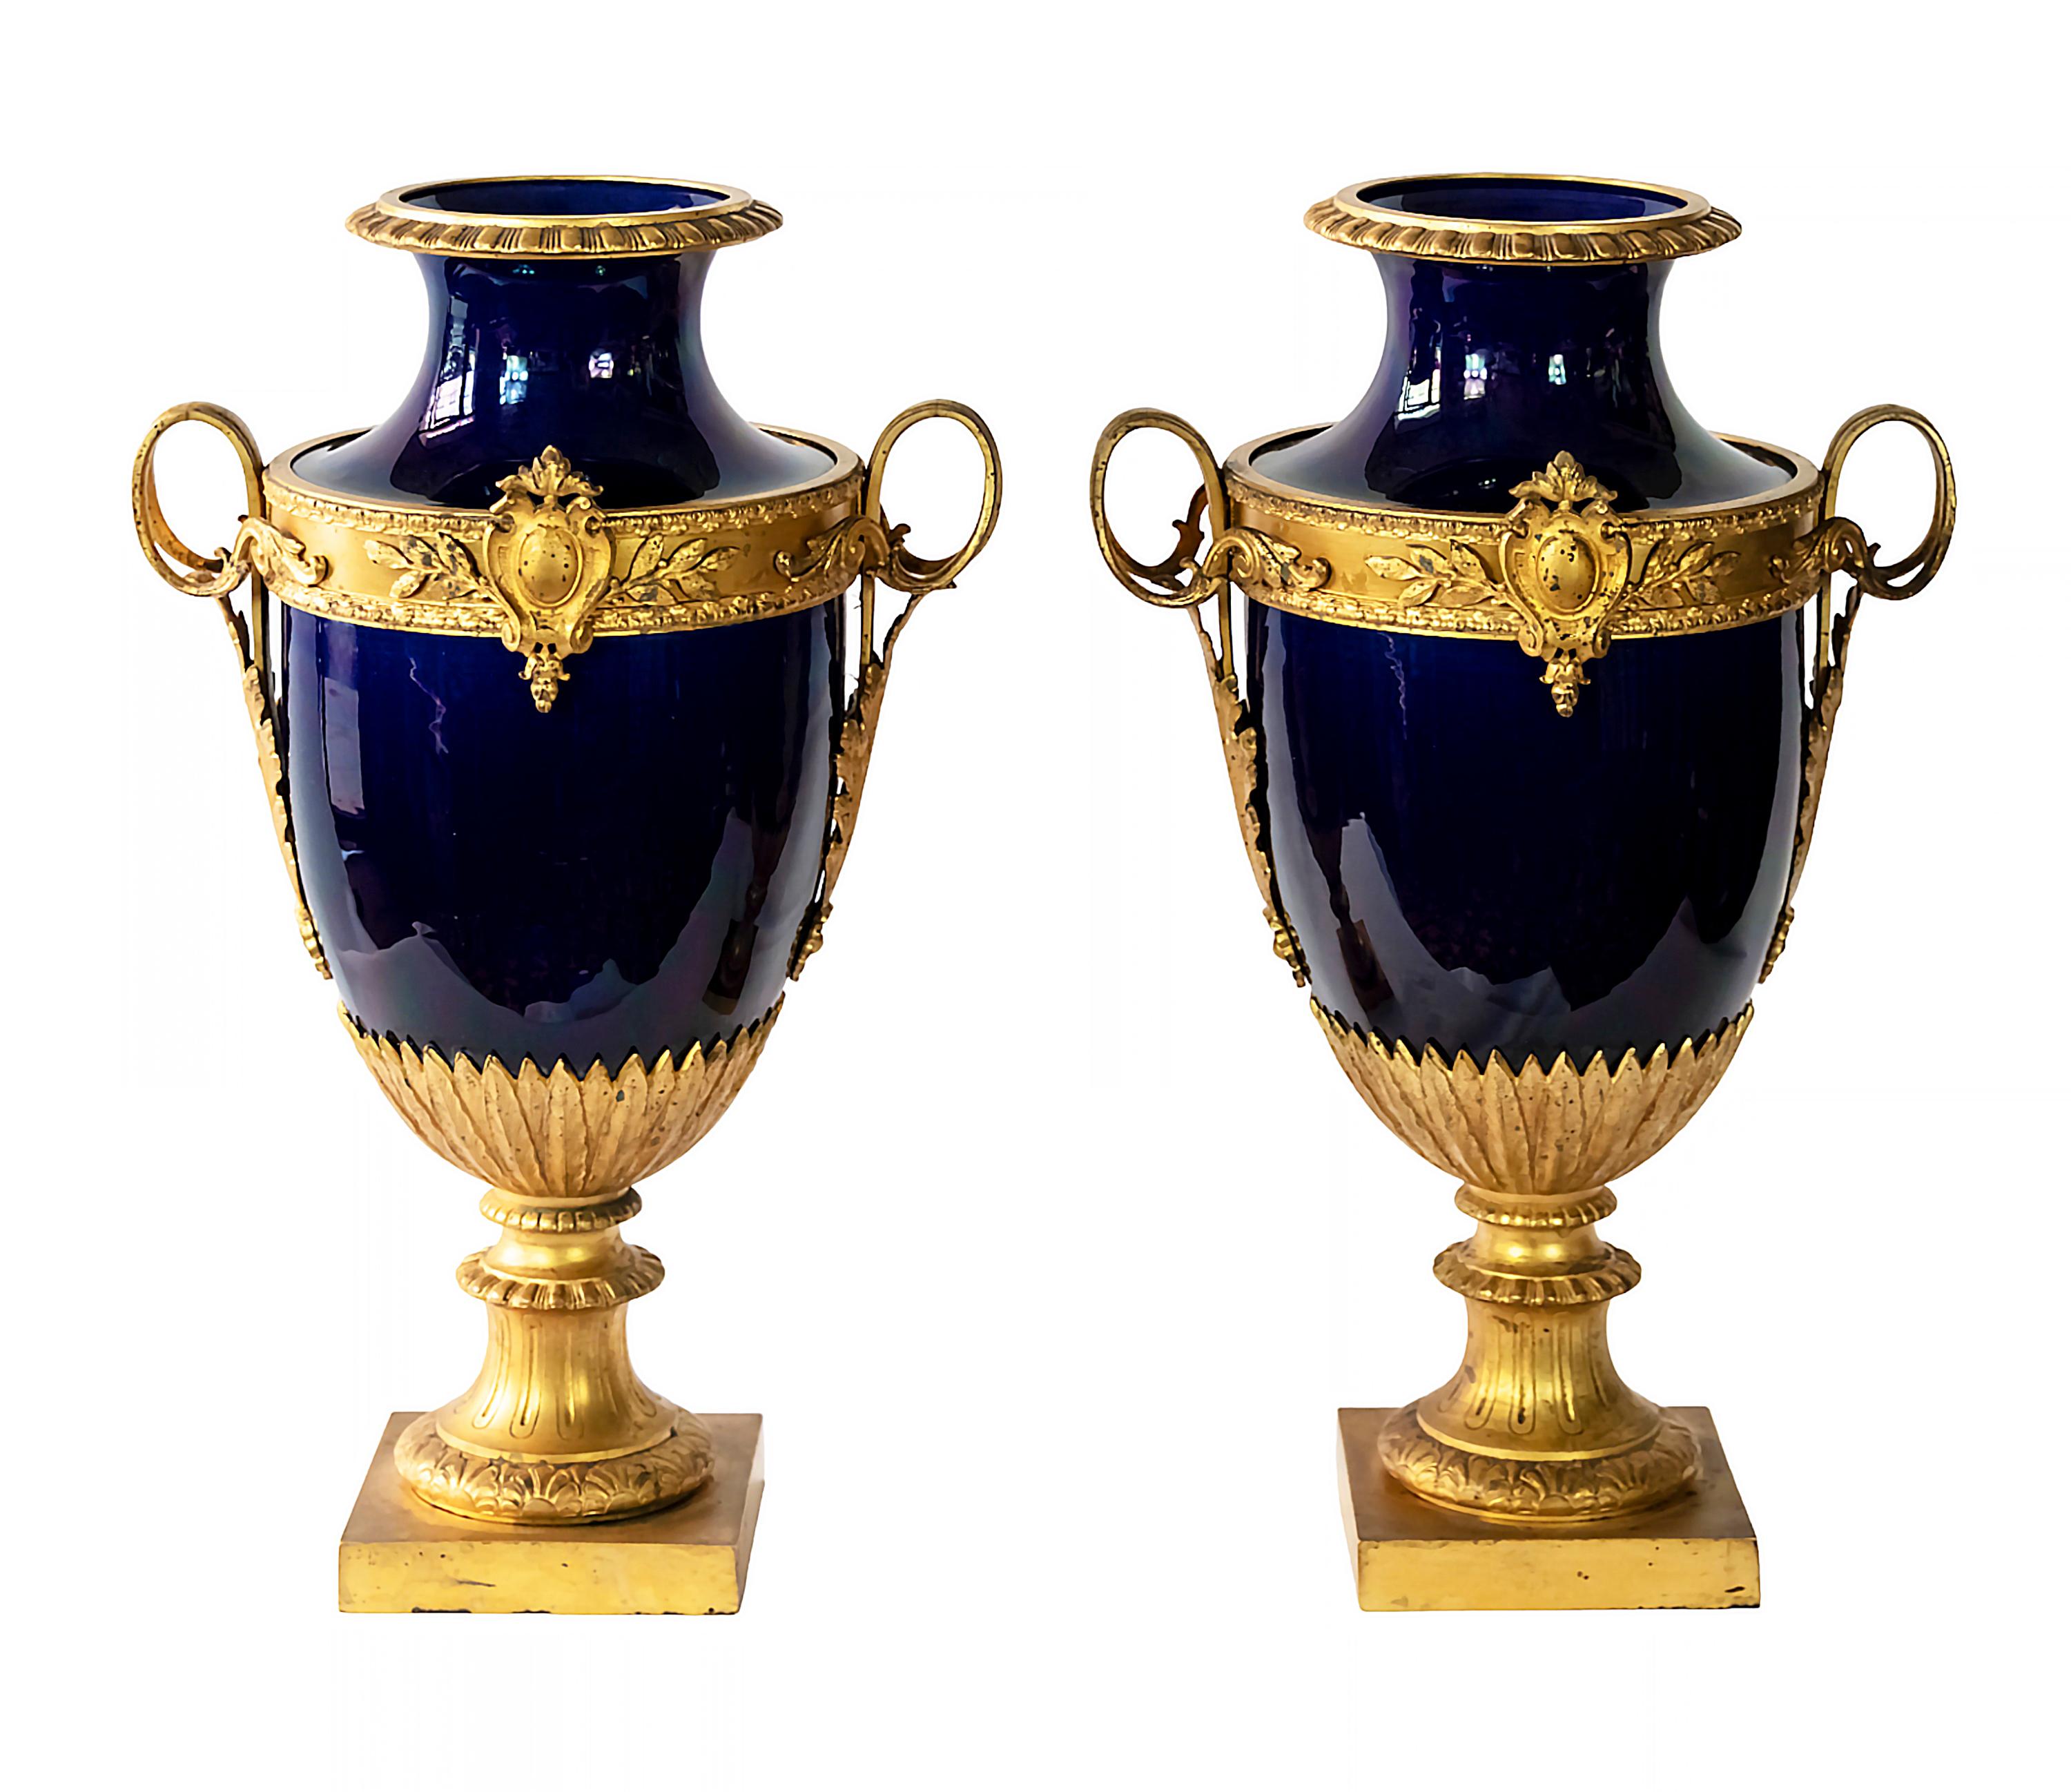 Pair of antique French Sevres style glazed cobalt blue decorative vases on the gilt bronze base and decorative details mounted all over the porcelain.